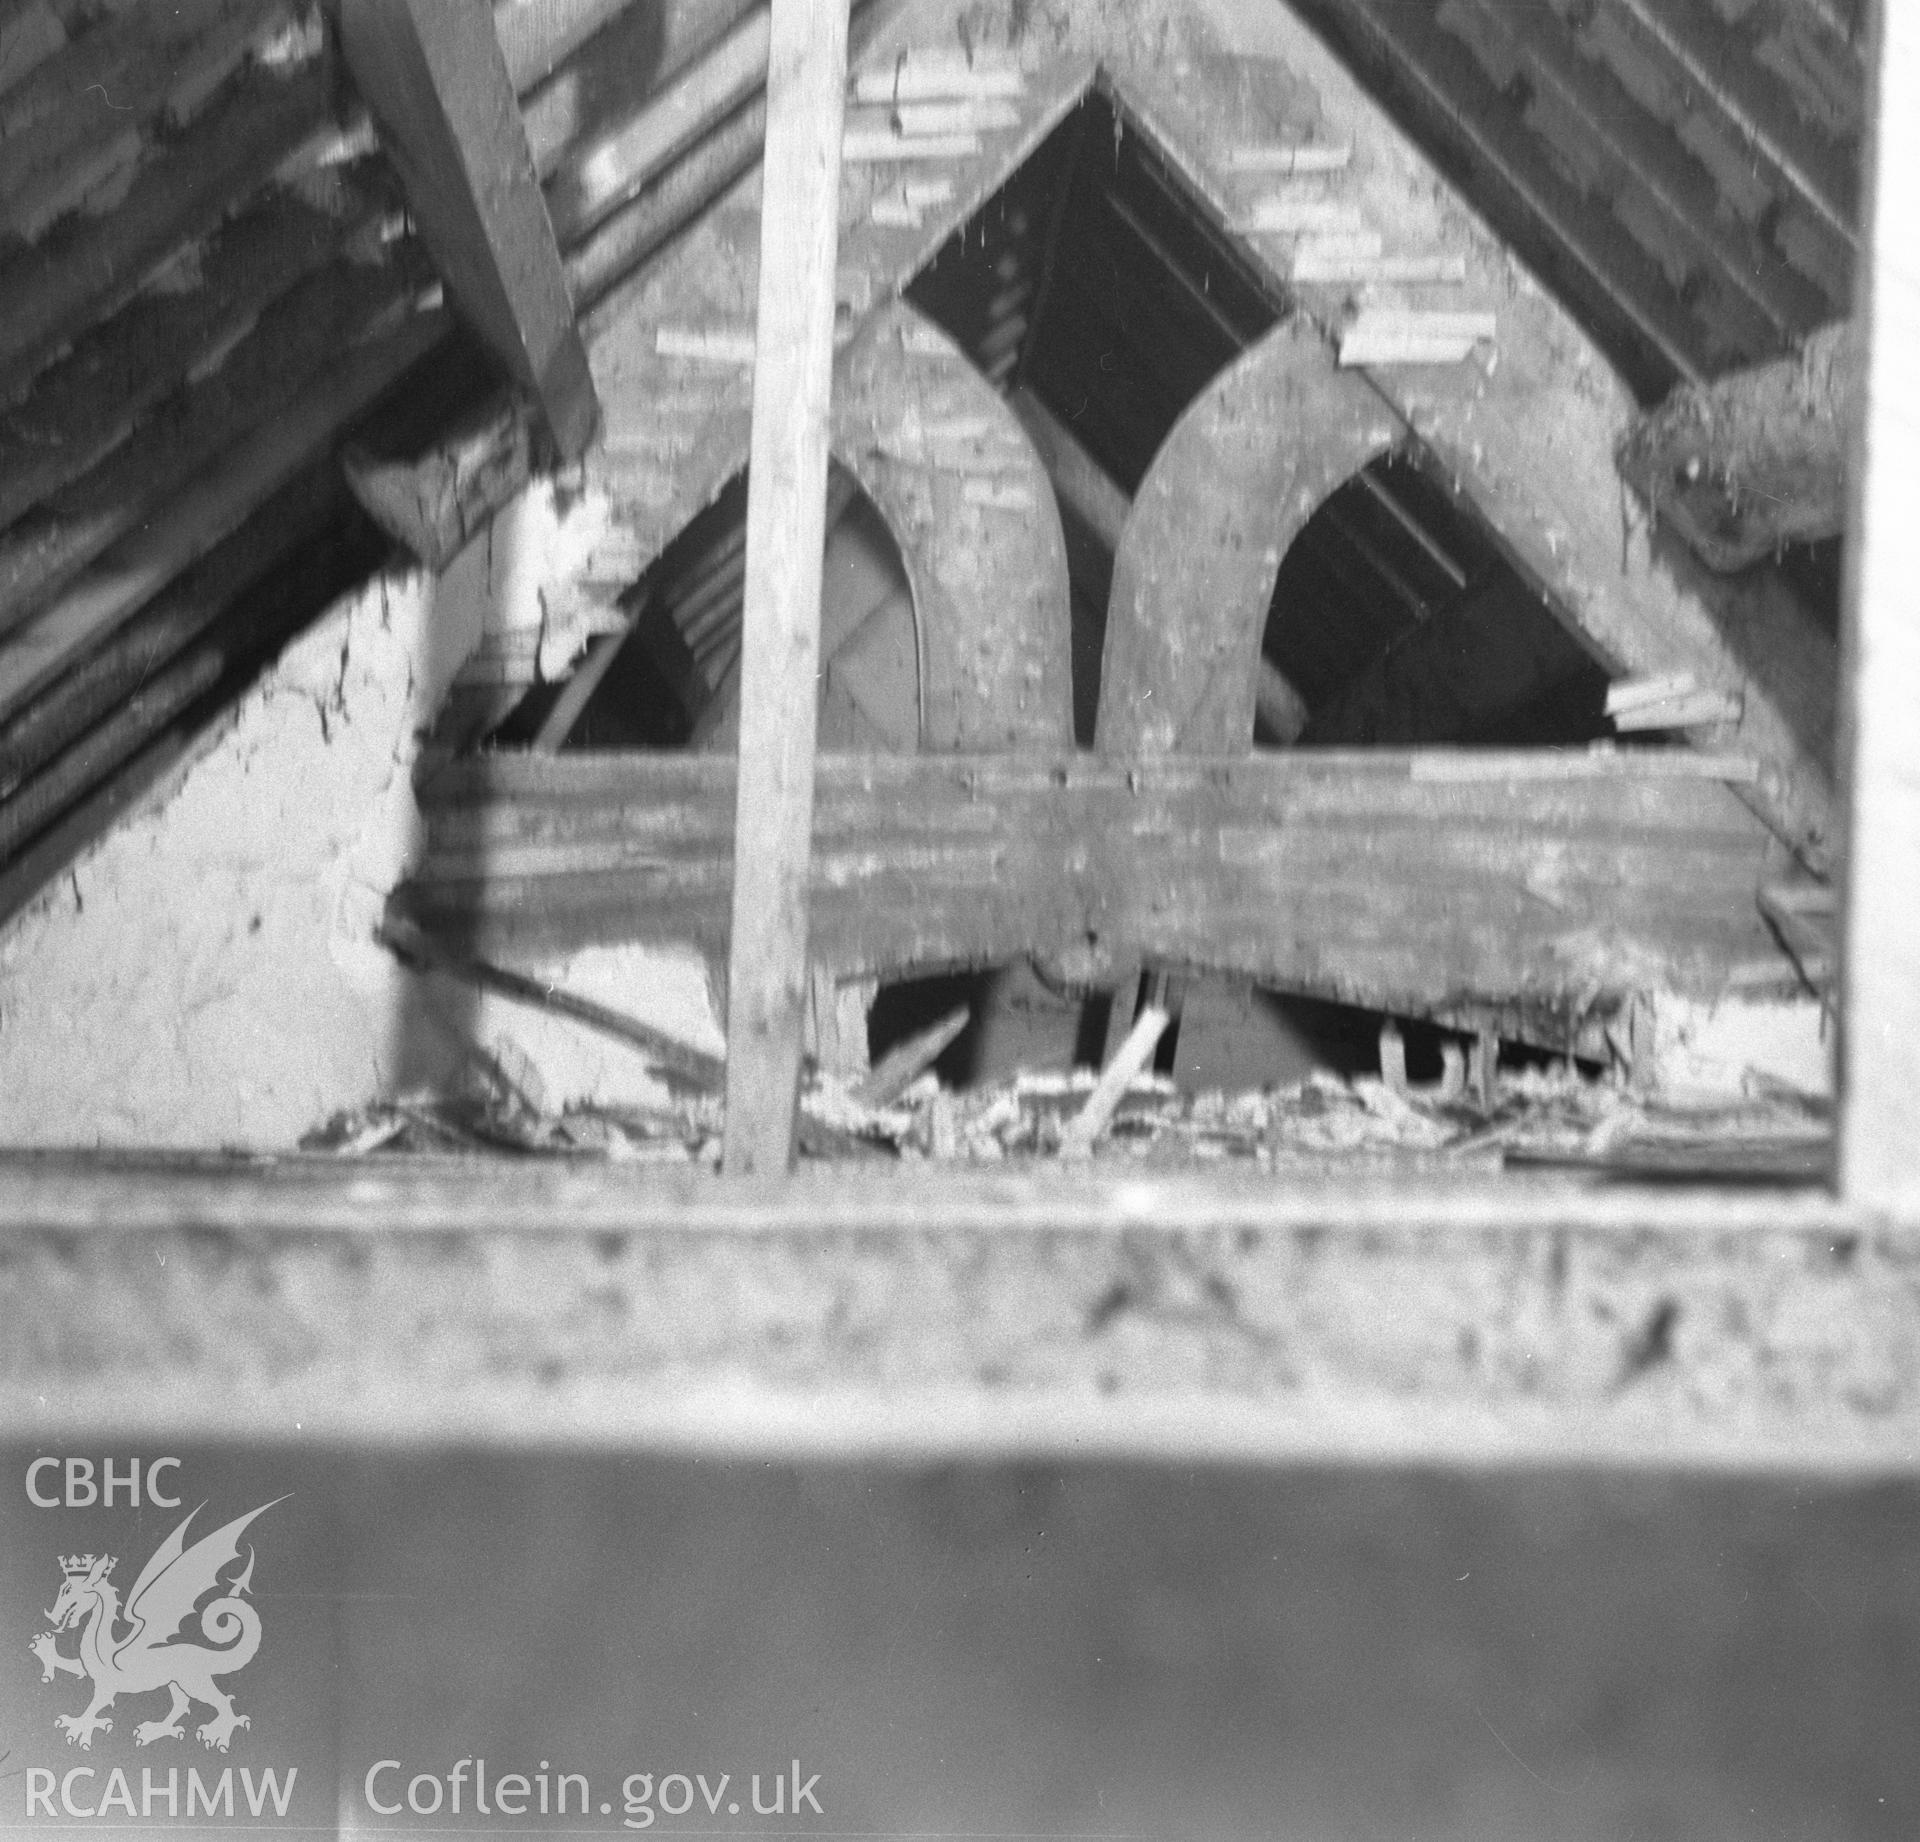 Black and white nitrate negative showing interior detail of roof beams, Brithdir Mawr, Flintshire.